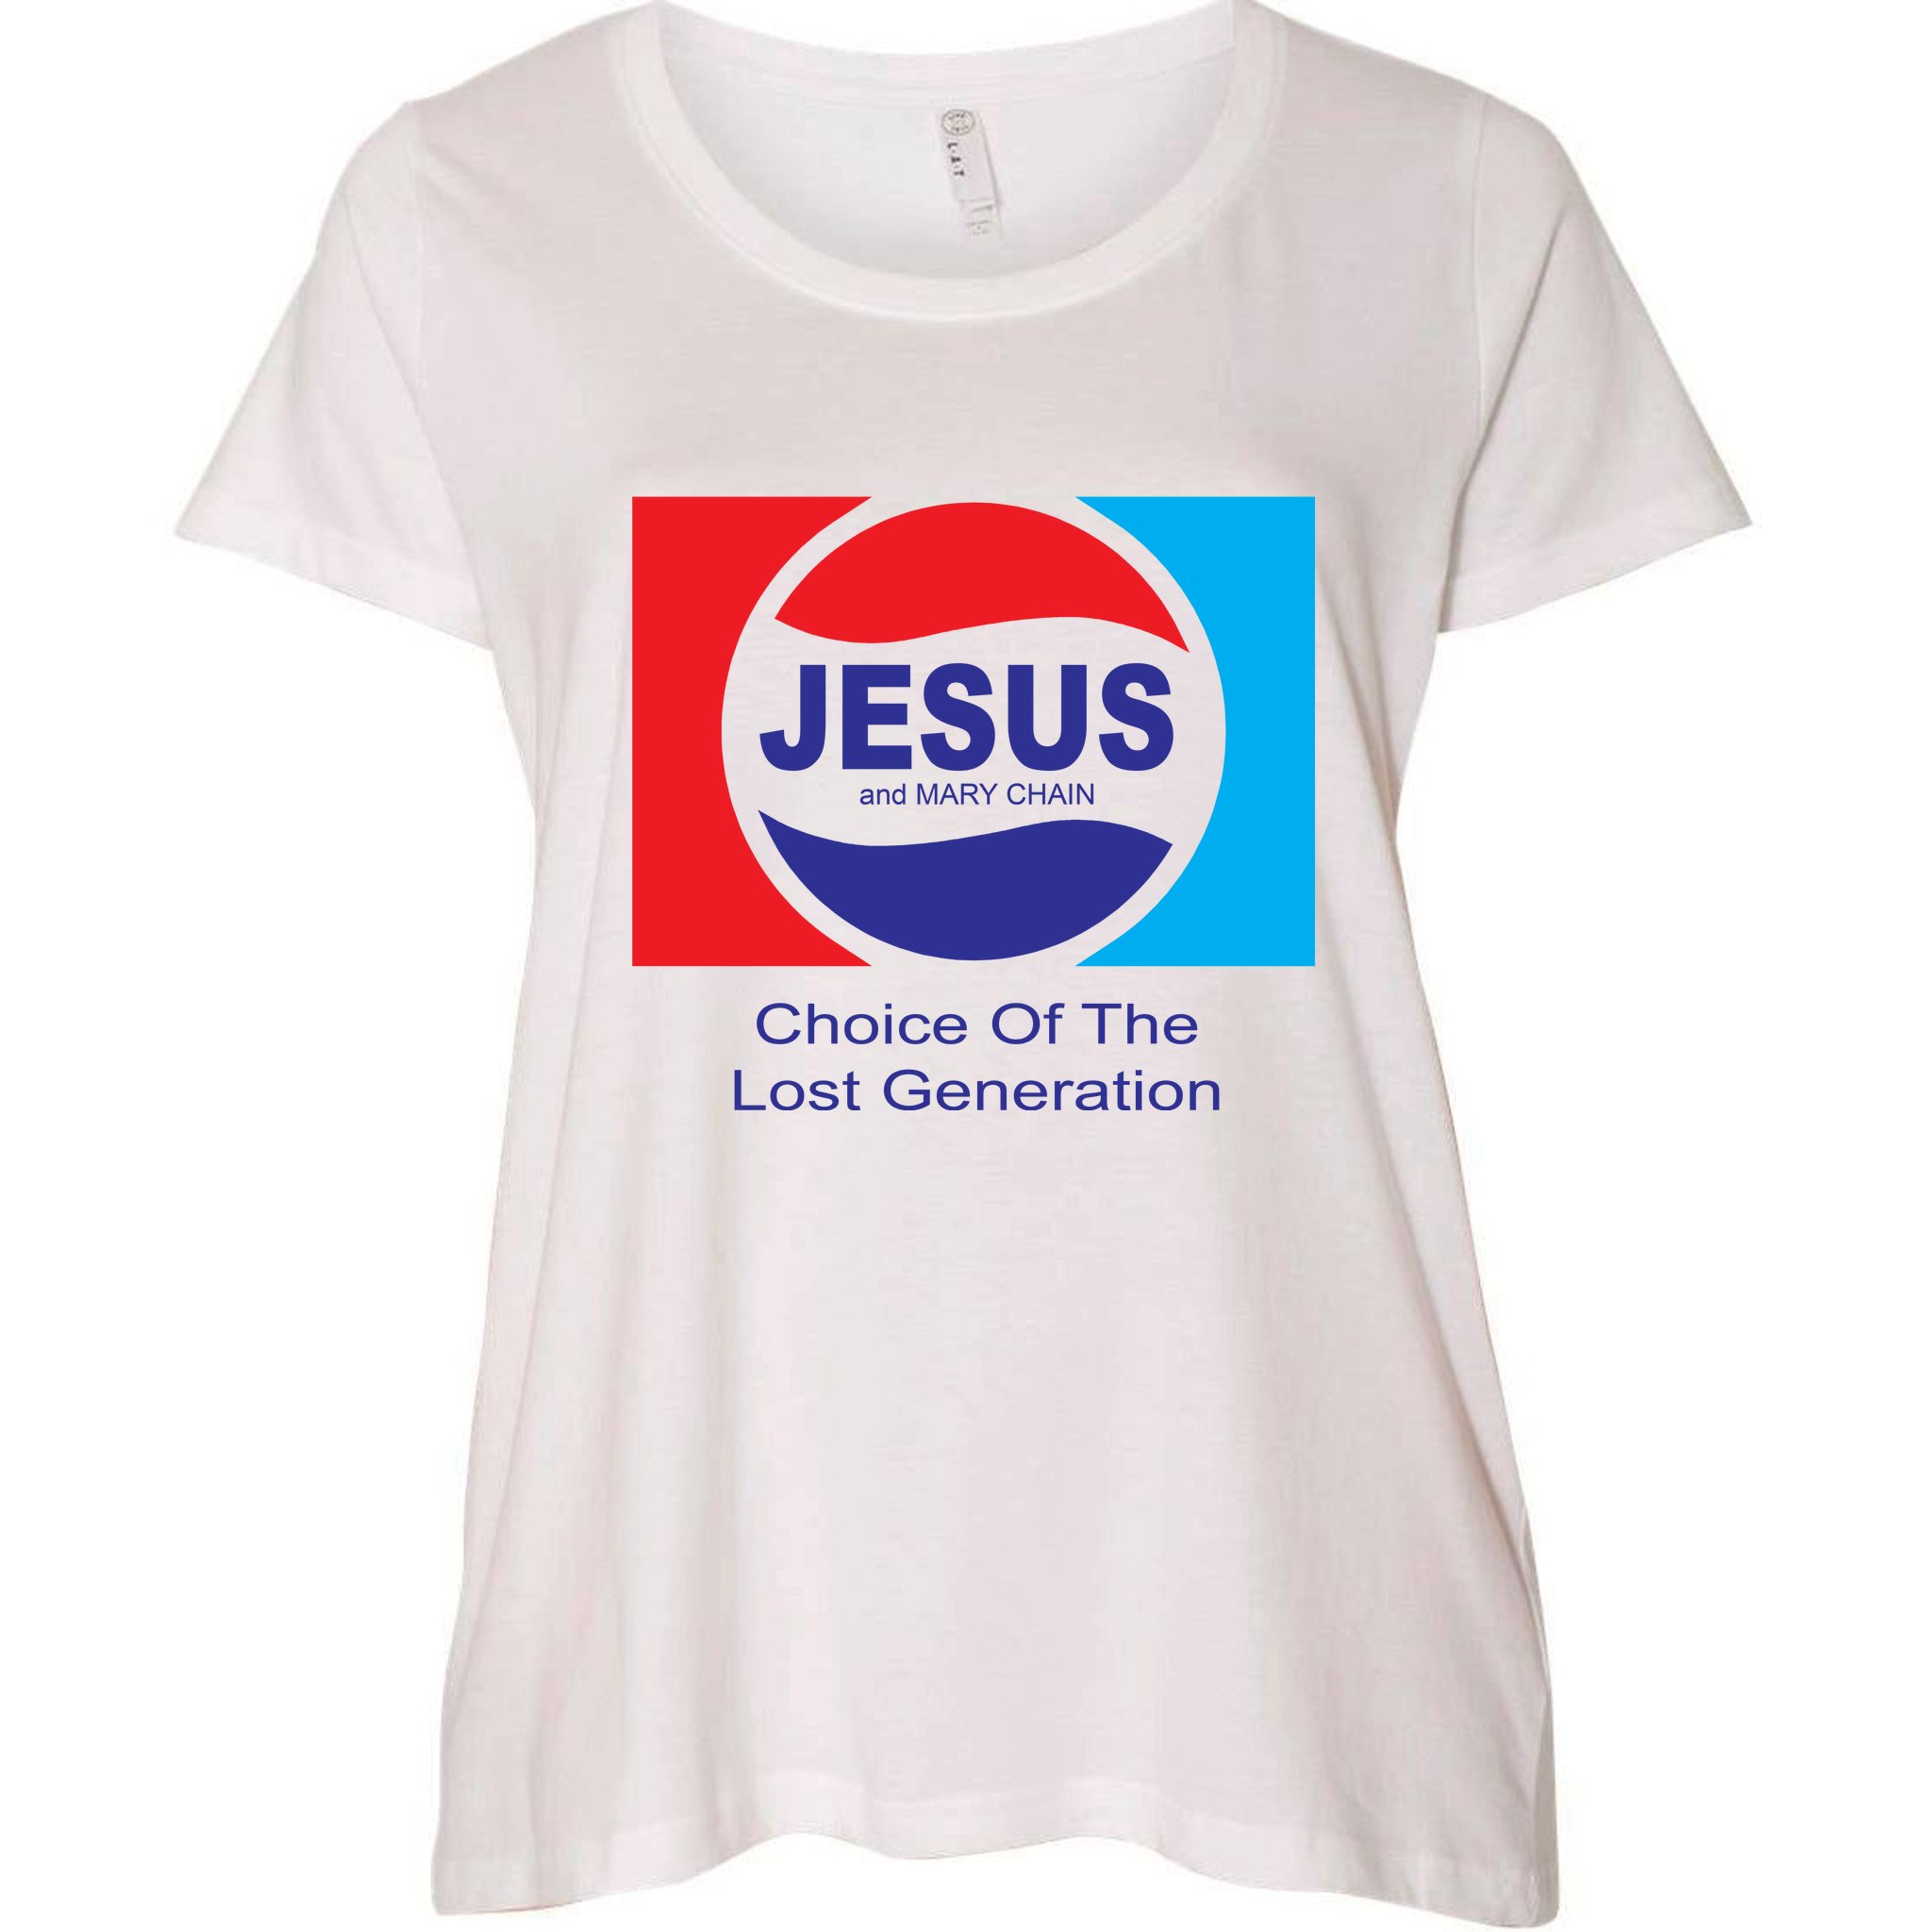 Jesus And Mary Chain Lost Generation Women's Plus Size T-Shirt